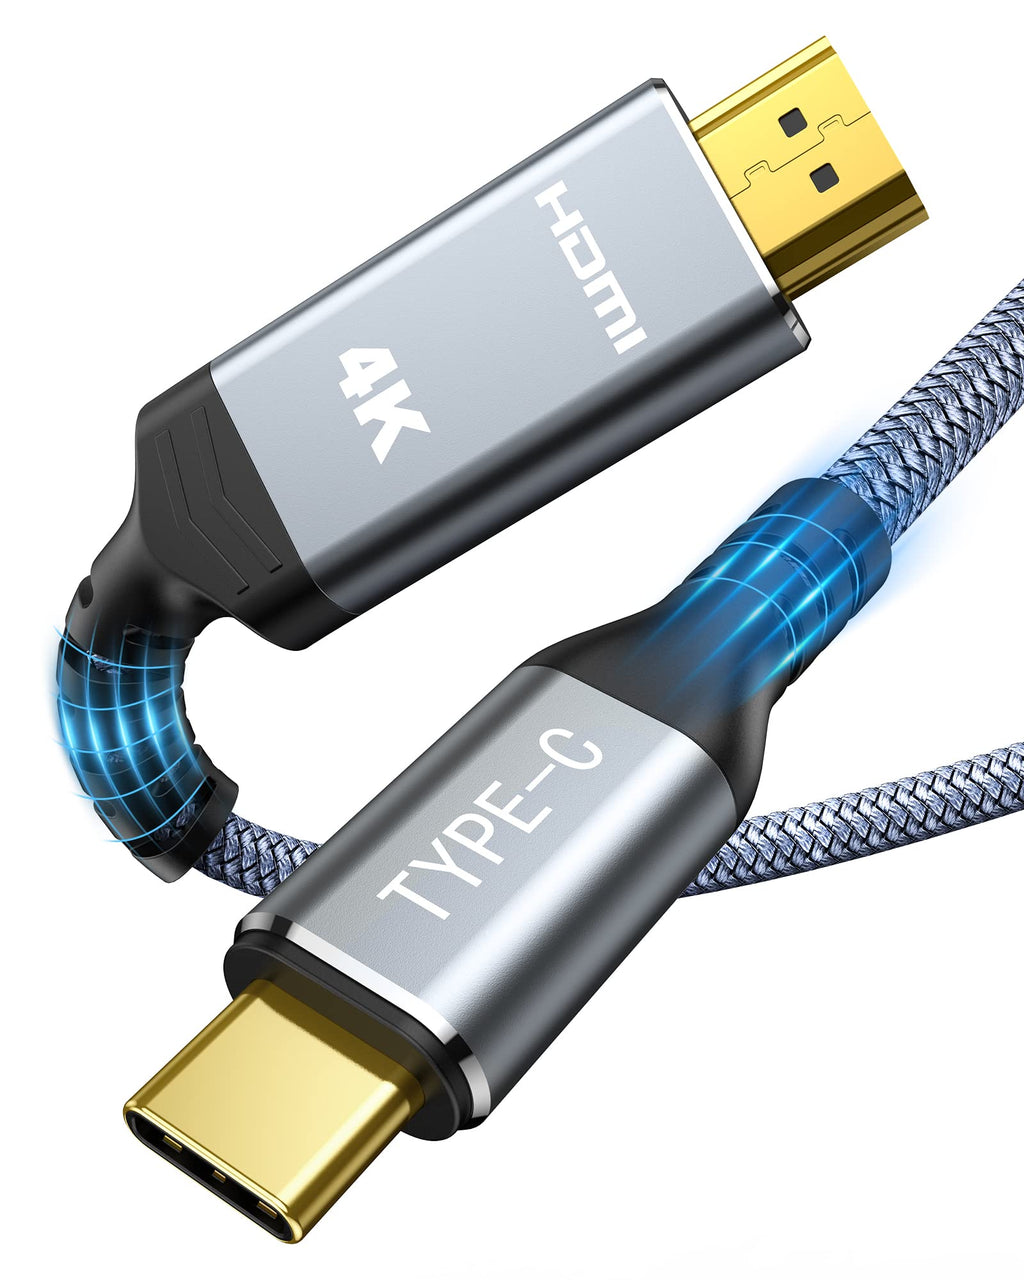  [AUSTRALIA] - Highwings USB C to HDMI Cable 4K, 6ft USB 3.1 Type C to HDMI 2.0 Cord, [Thunderbolt 3/4 Compatible] for MacBook Pro/Air, iMac, iPad Pro, Samsung Galaxy S8 to S22, Surface, Dell, HP, and More 6 Feet